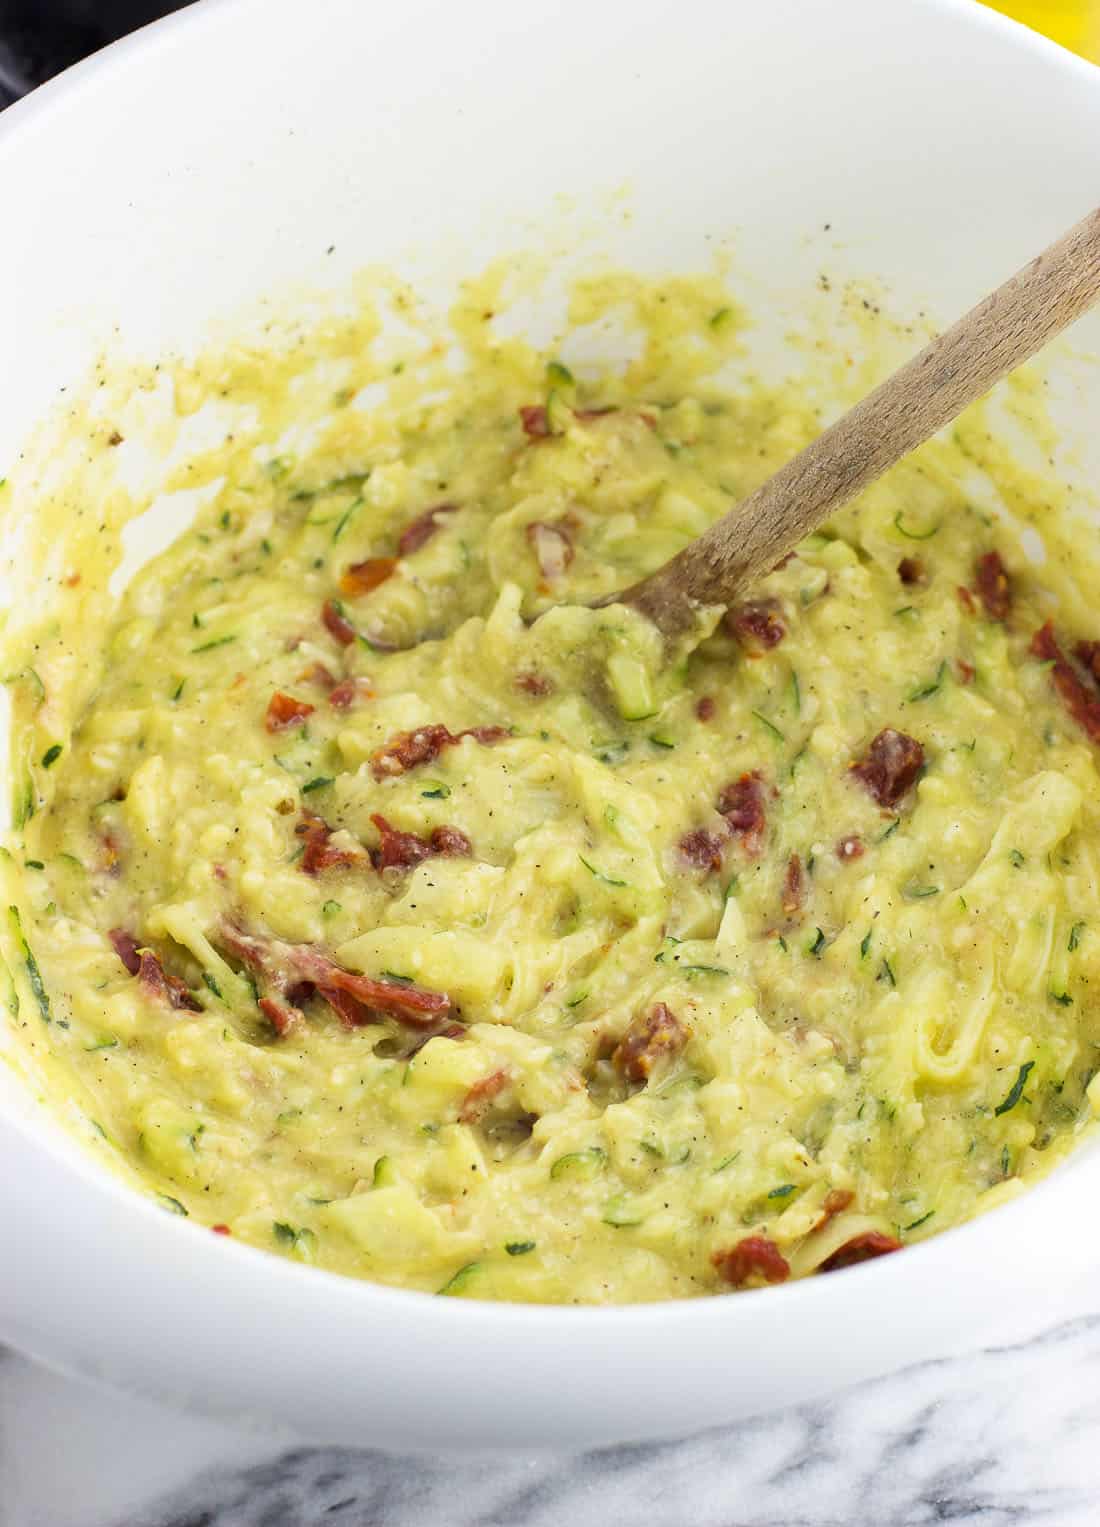 Quiche mixture stirred together in a plastic mixing bowl with a wooden spoon